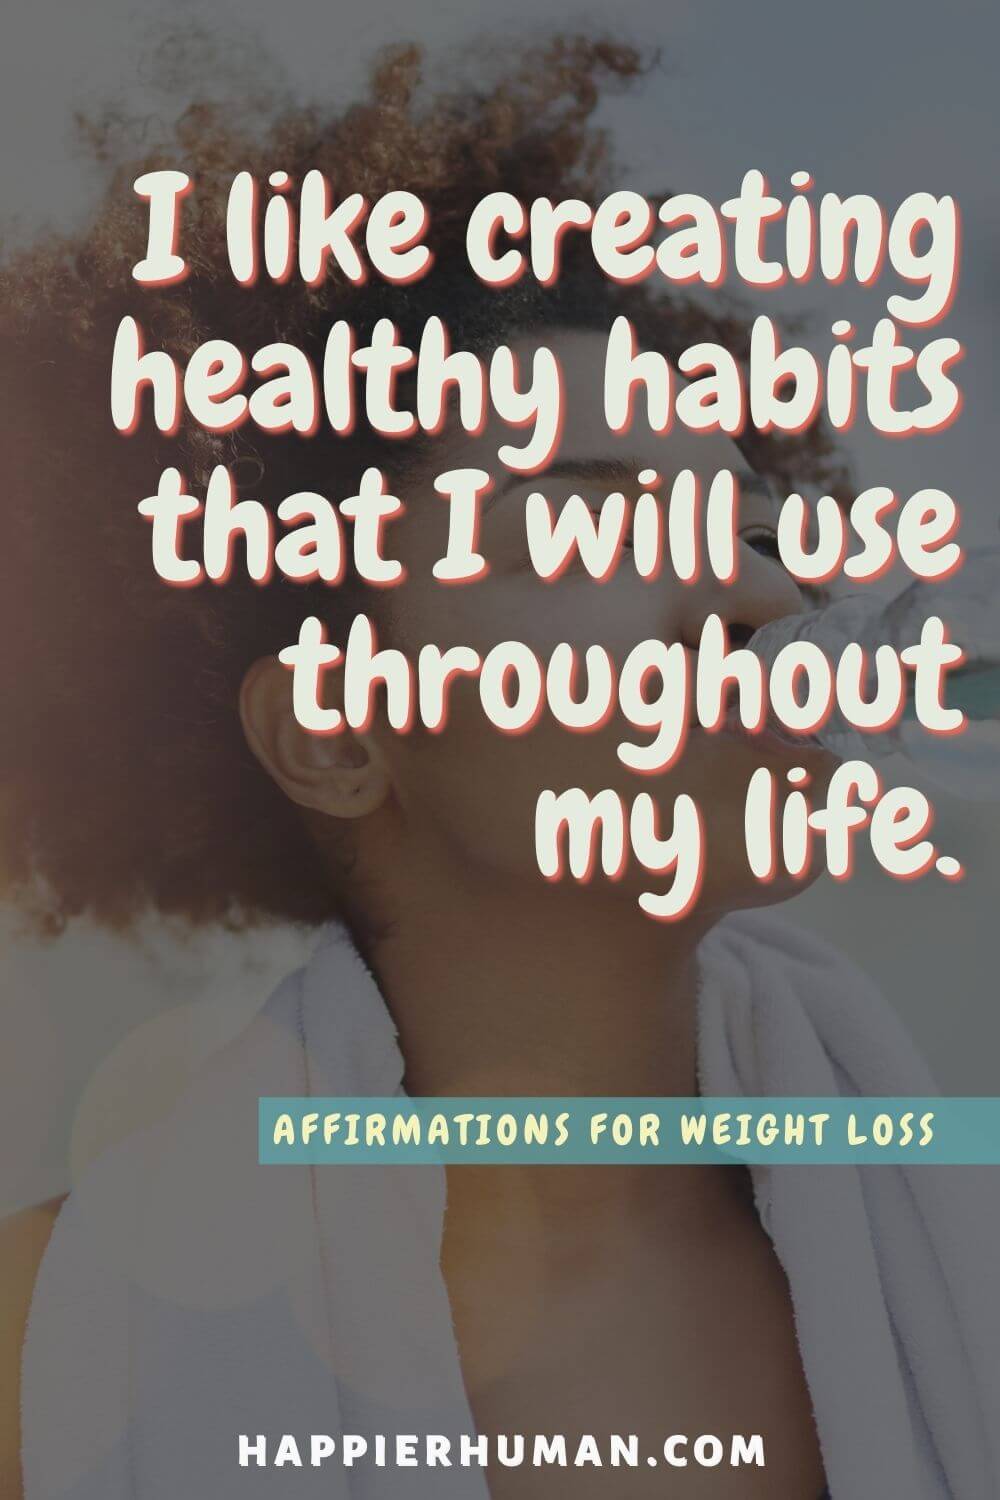 Affirmations For Weight Loss - I like creating healthy habits that I will use throughout my life. | affirmations for weight loss self talk | spiritual affirmations for weight loss | sleep affirmations for weight loss